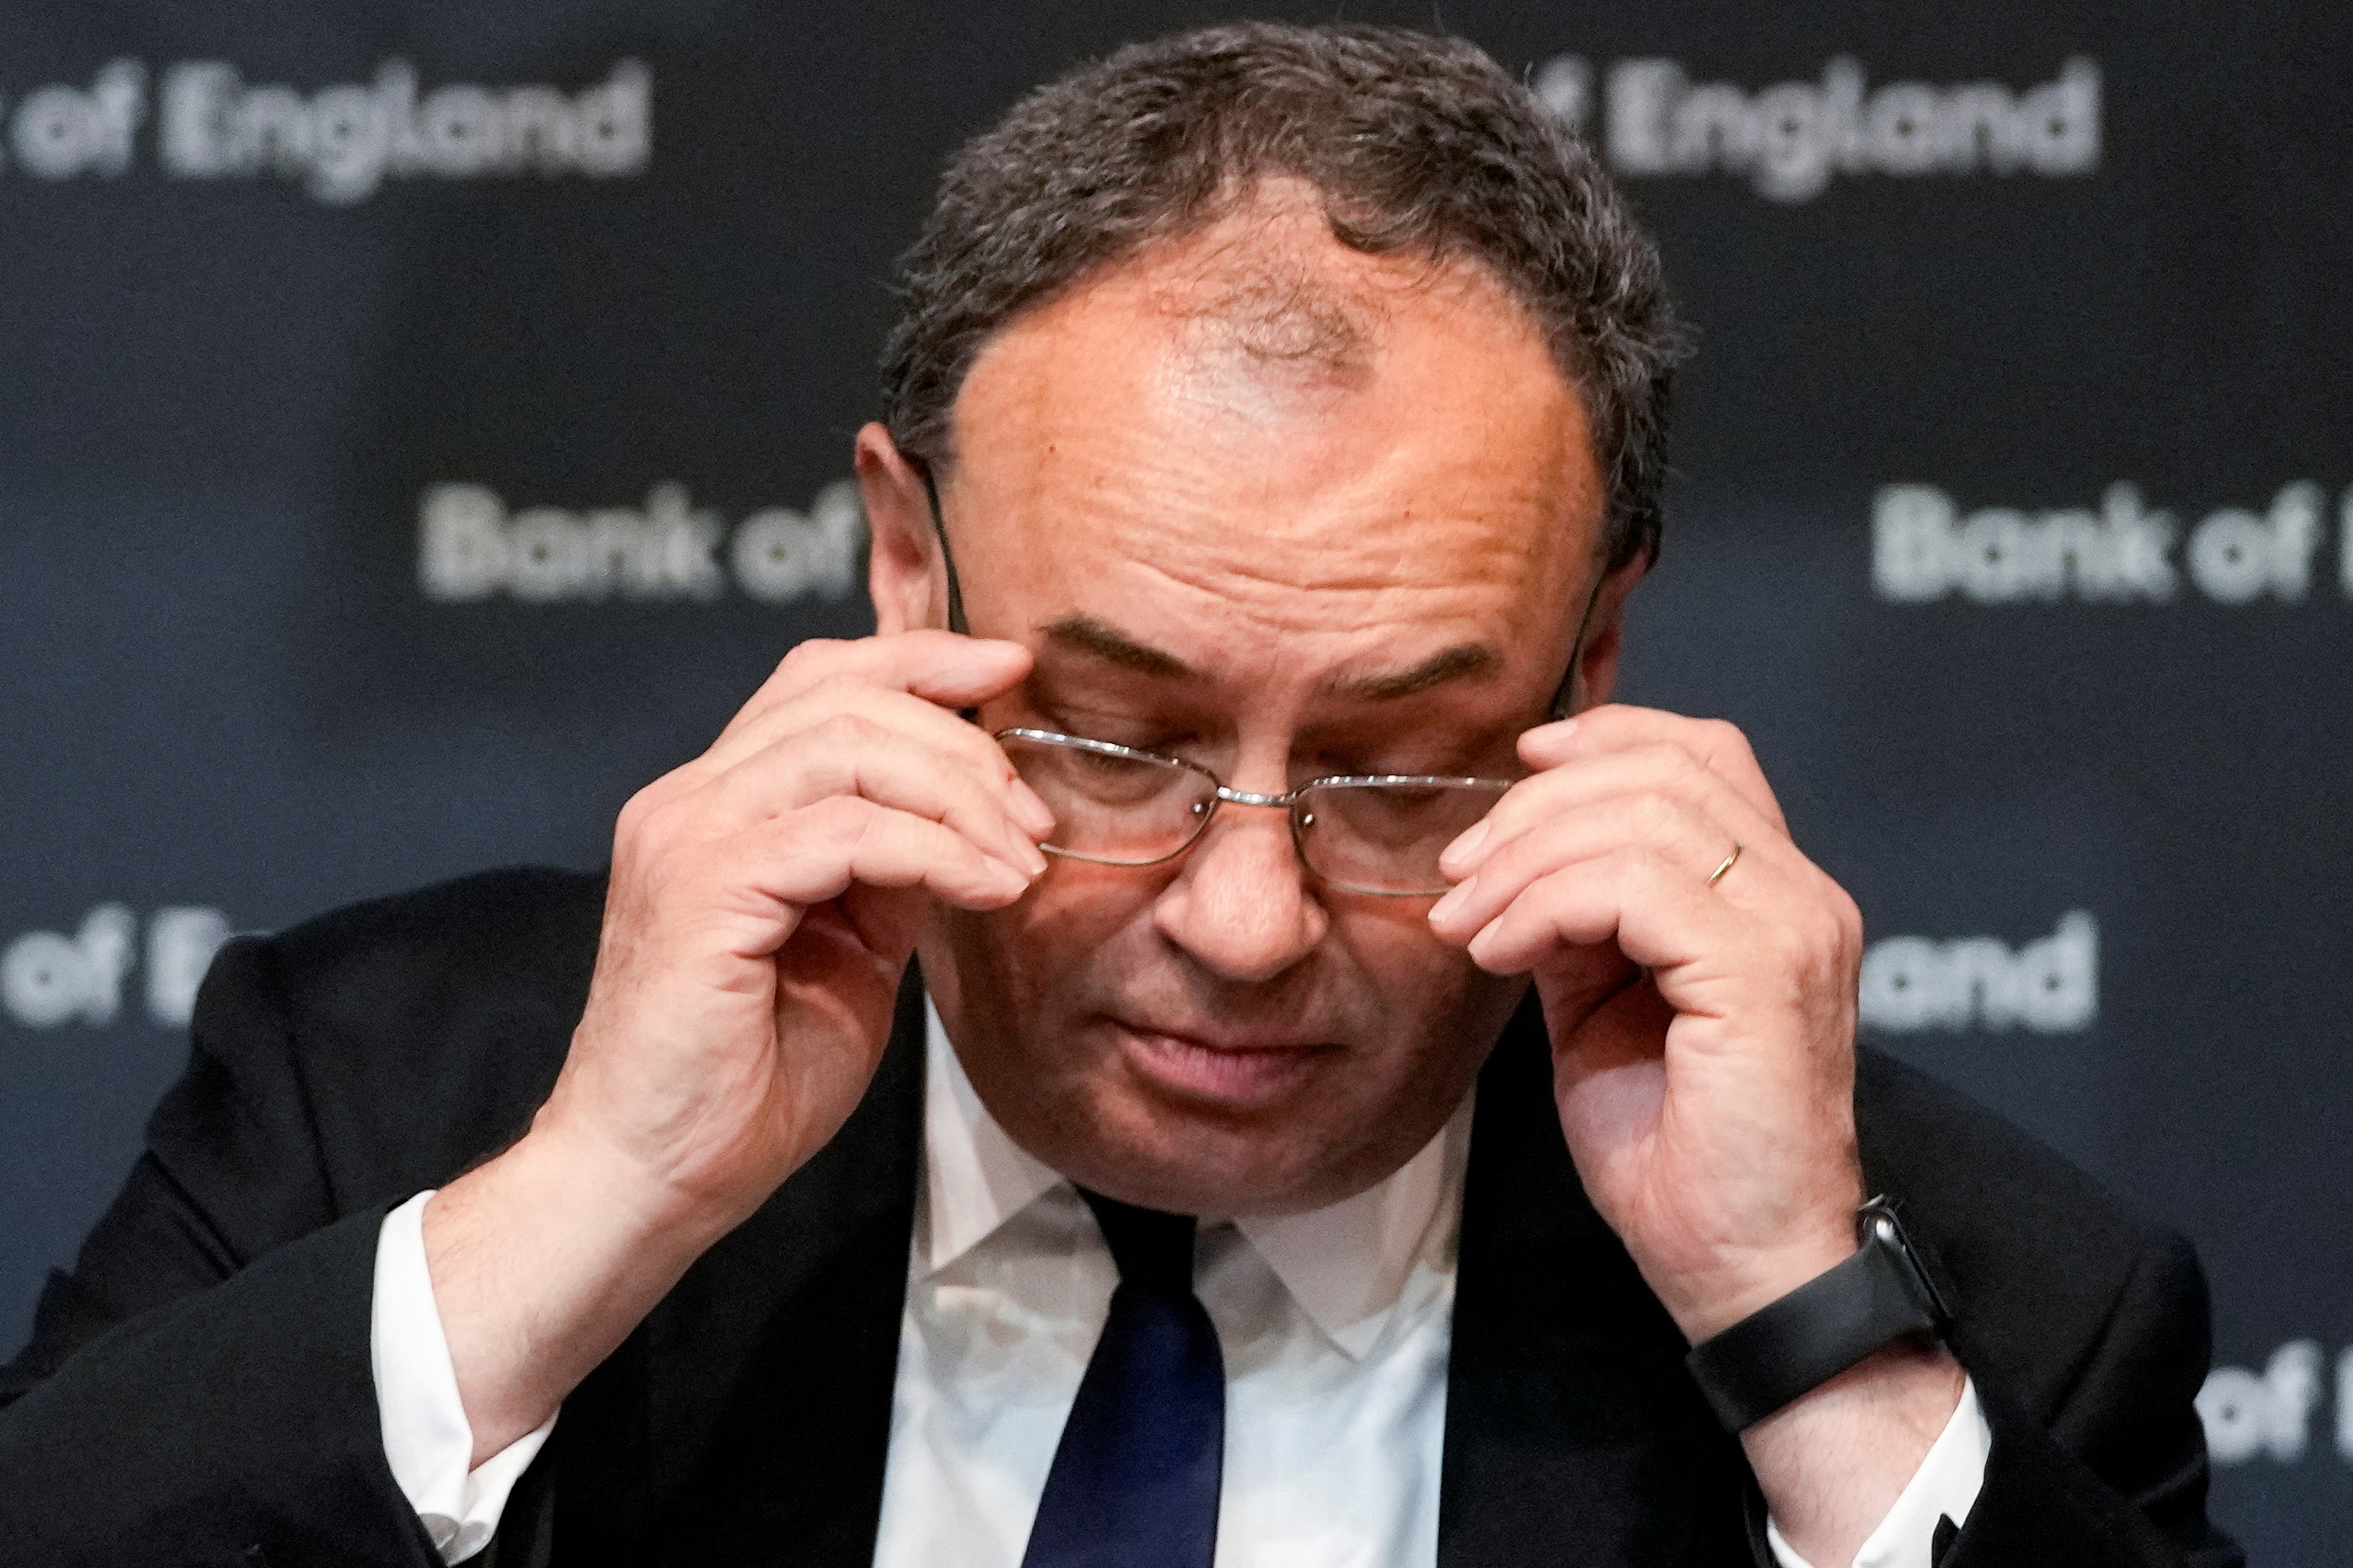 Governor of the Bank of England Andrew Bailey addresses the media on the Monetary Policy Report, in London